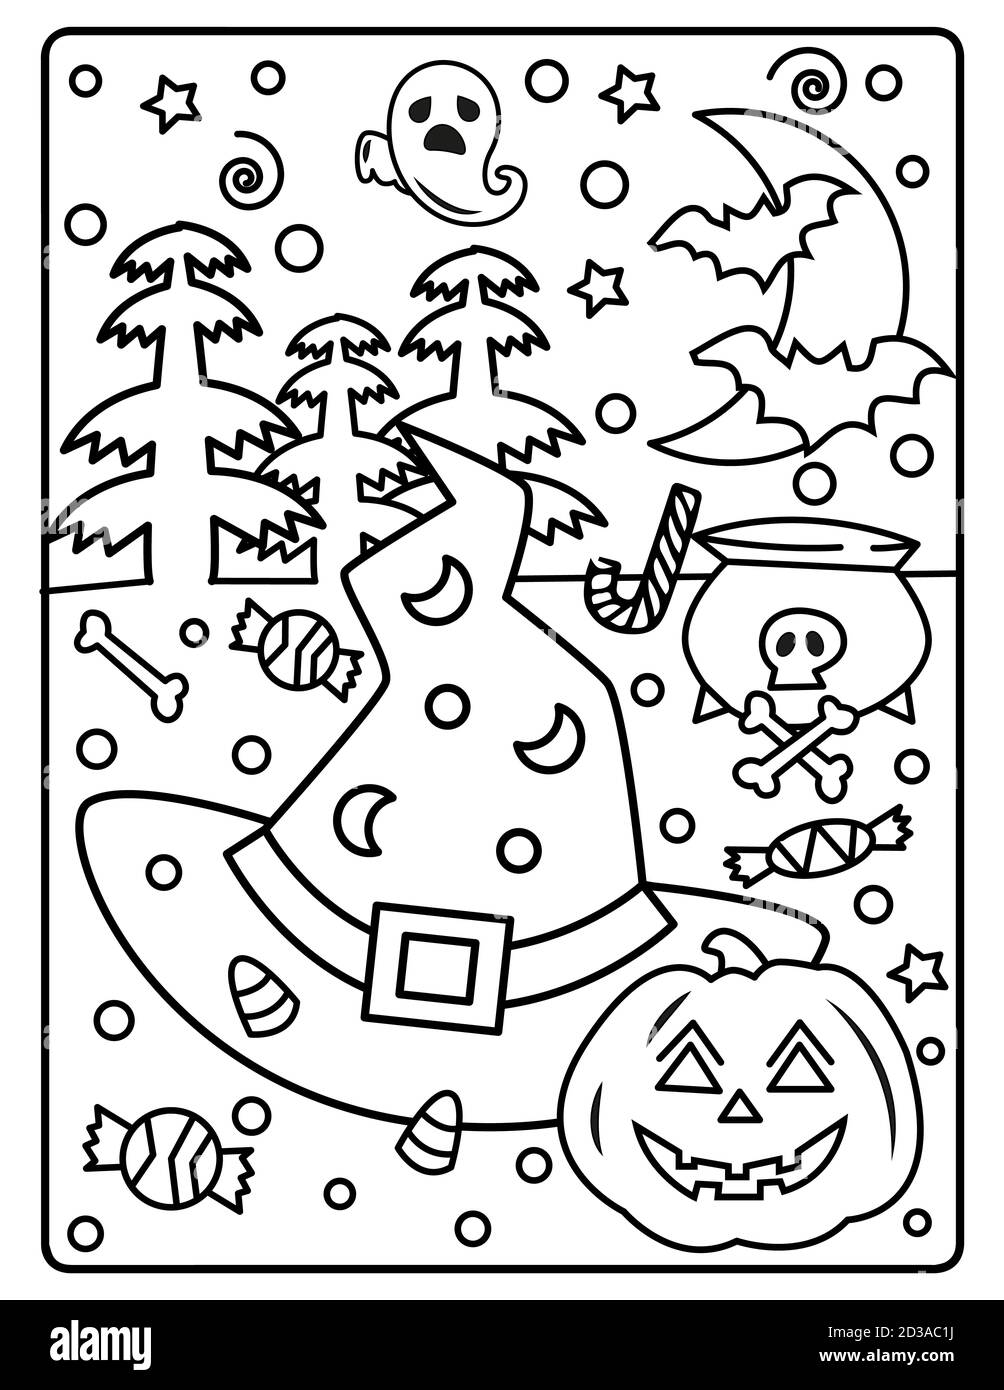 Christmas coloring page for kids Stock Photo